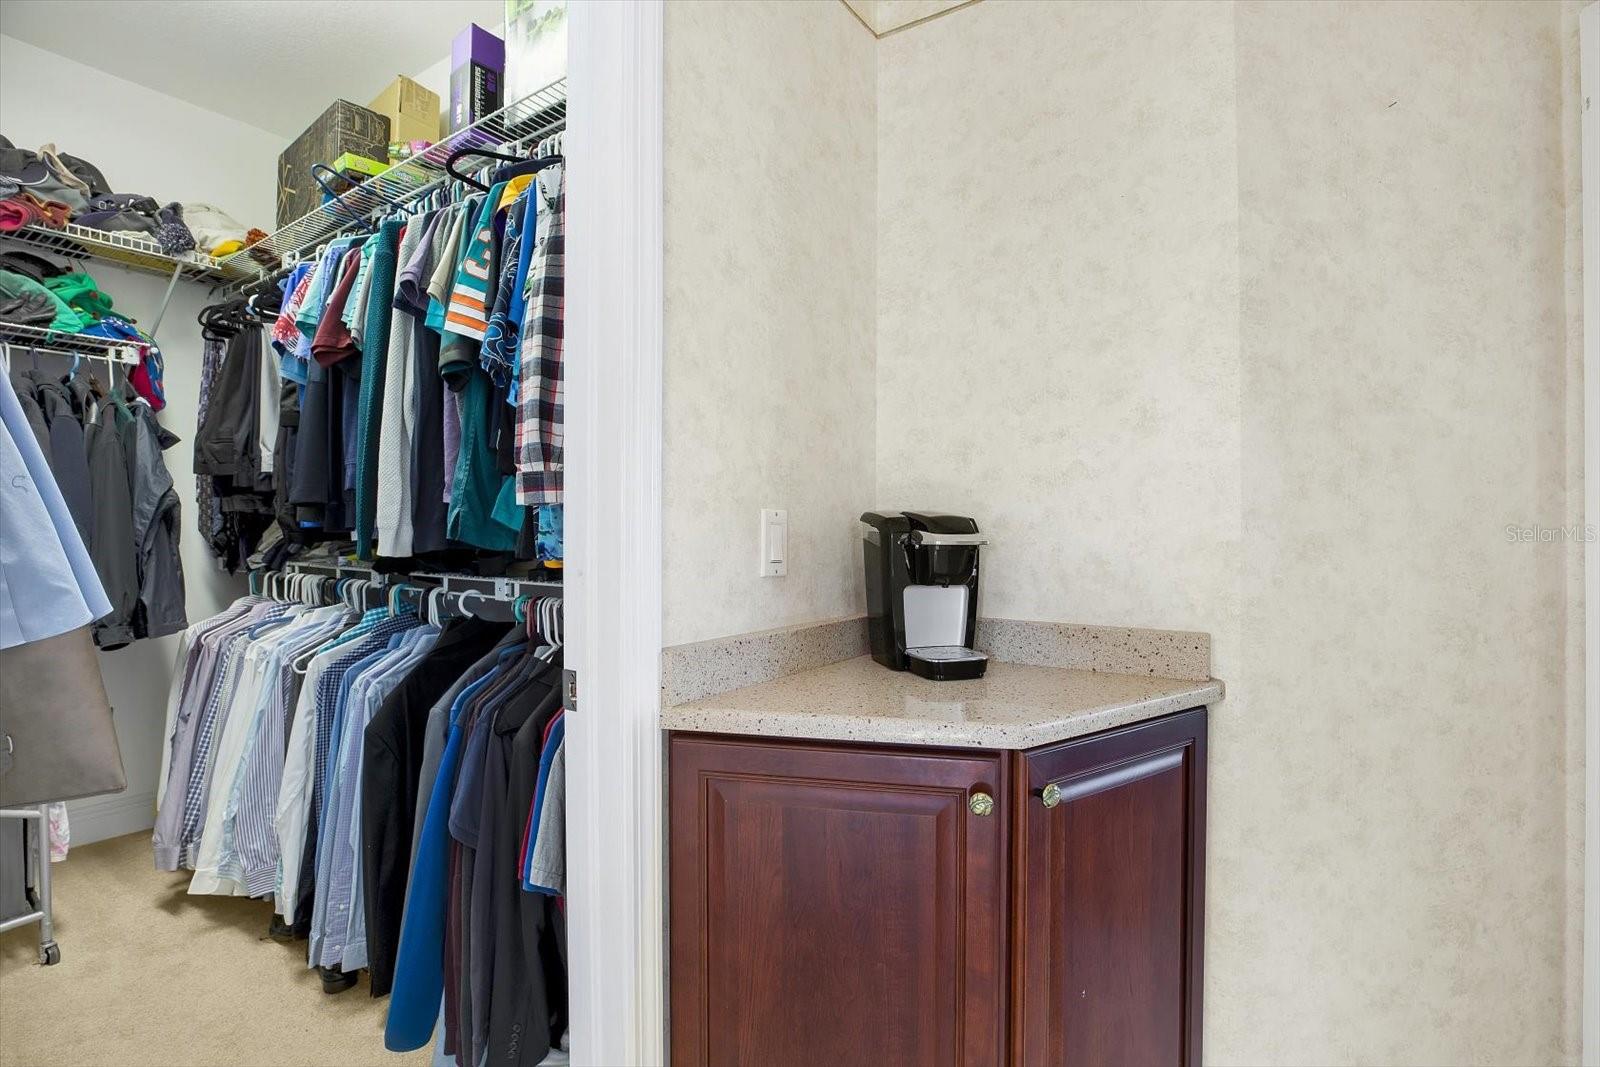 His- one of two walk-in closets located off the primary bath